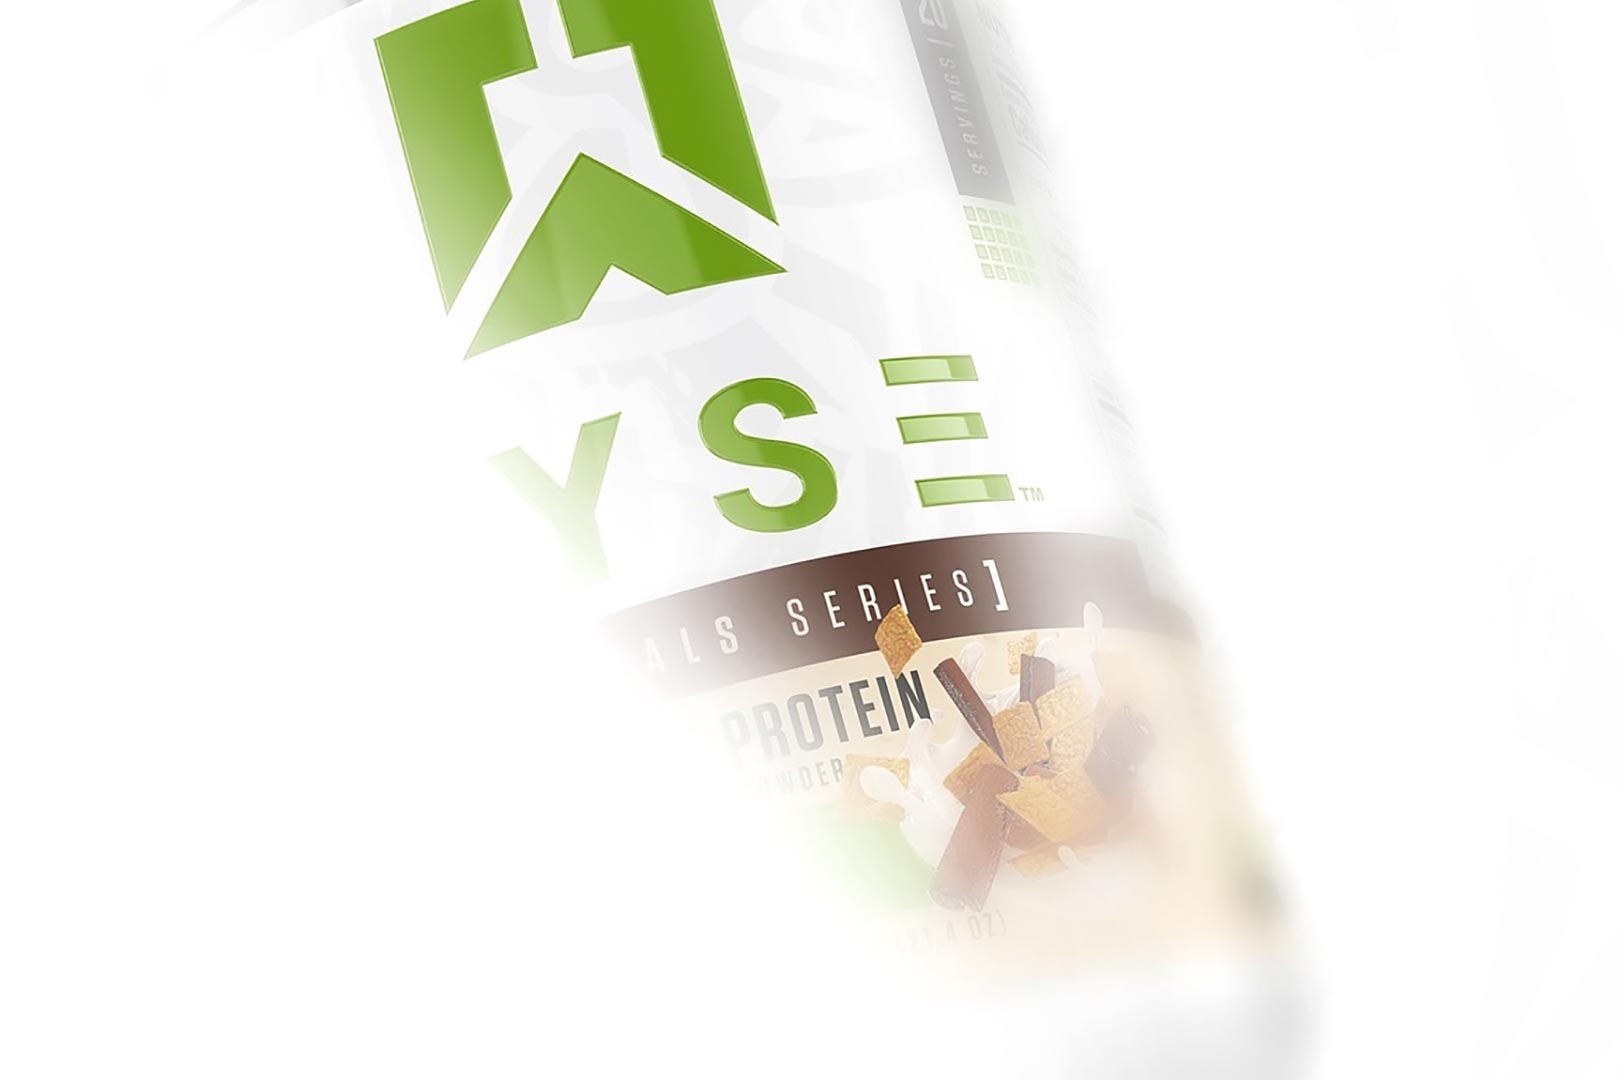 Teaser Of Ryse Plant Protein